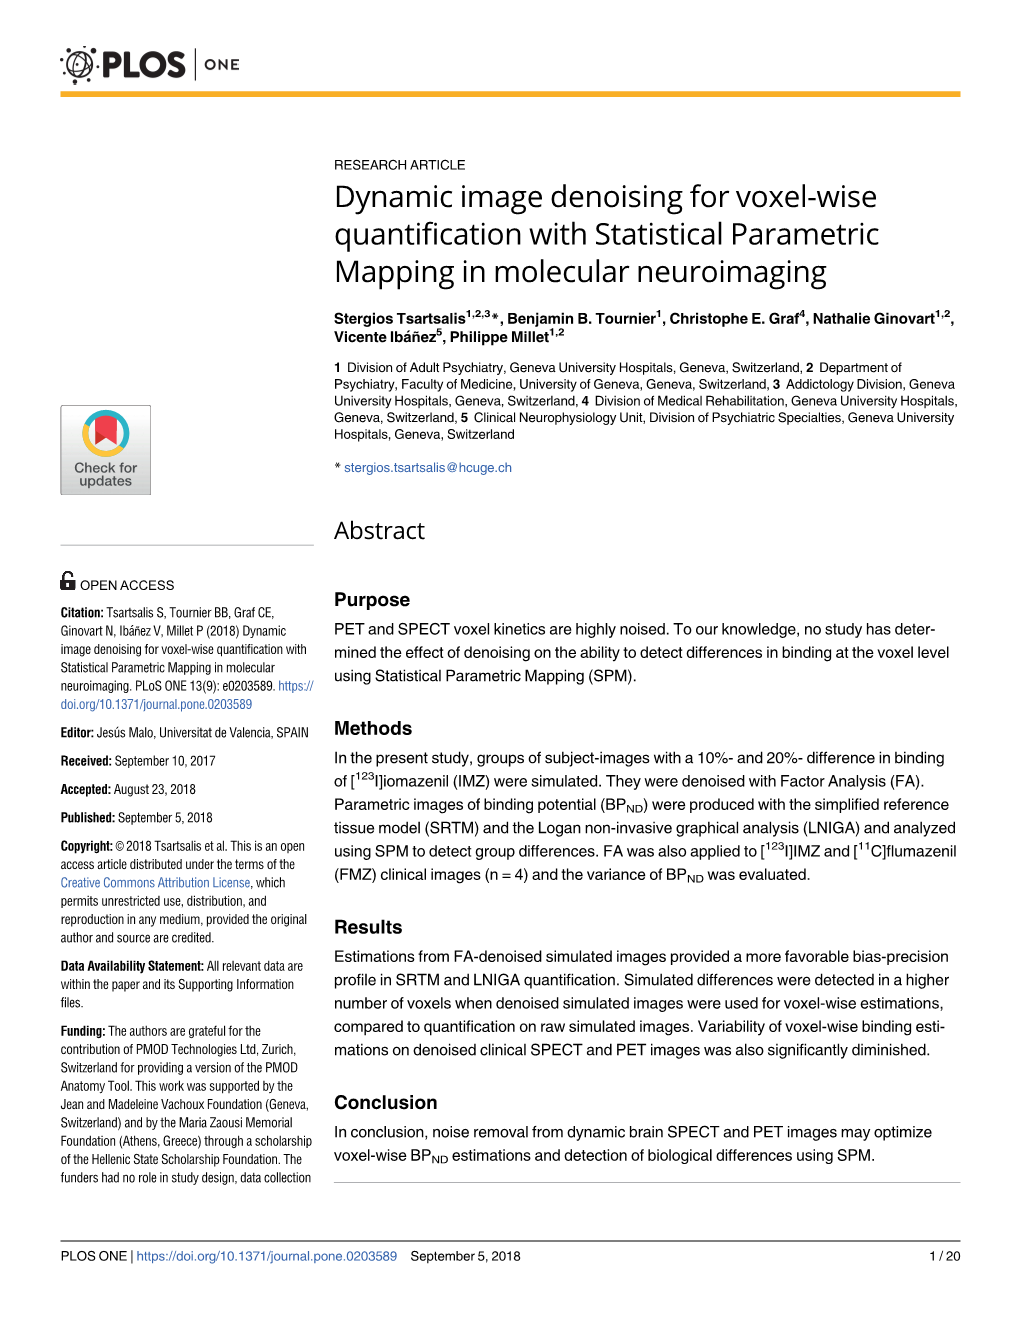 Dynamic Image Denoising for Voxel-Wise Quantification with Statistical Parametric Mapping in Molecular Neuroimaging